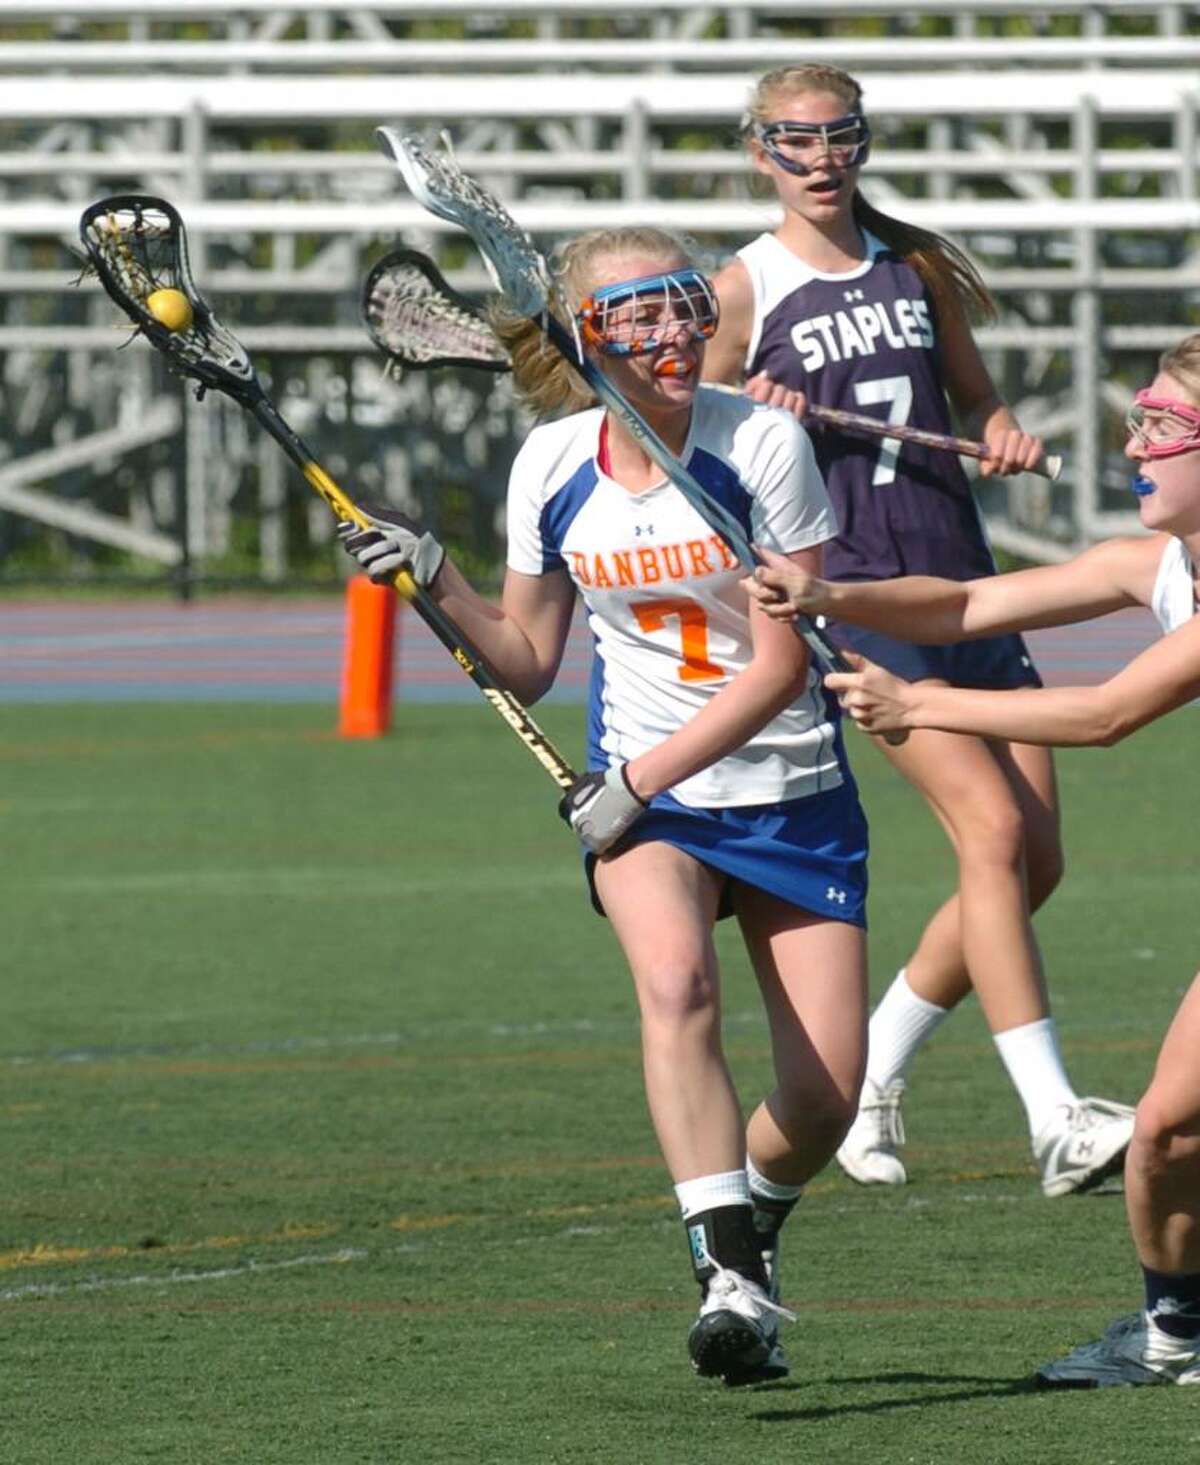 Danbury's, 7, Kate Keckeisen heads up-field during the girls lacrosse game against Staples at Danbury High, Friday, April 30, 2010.